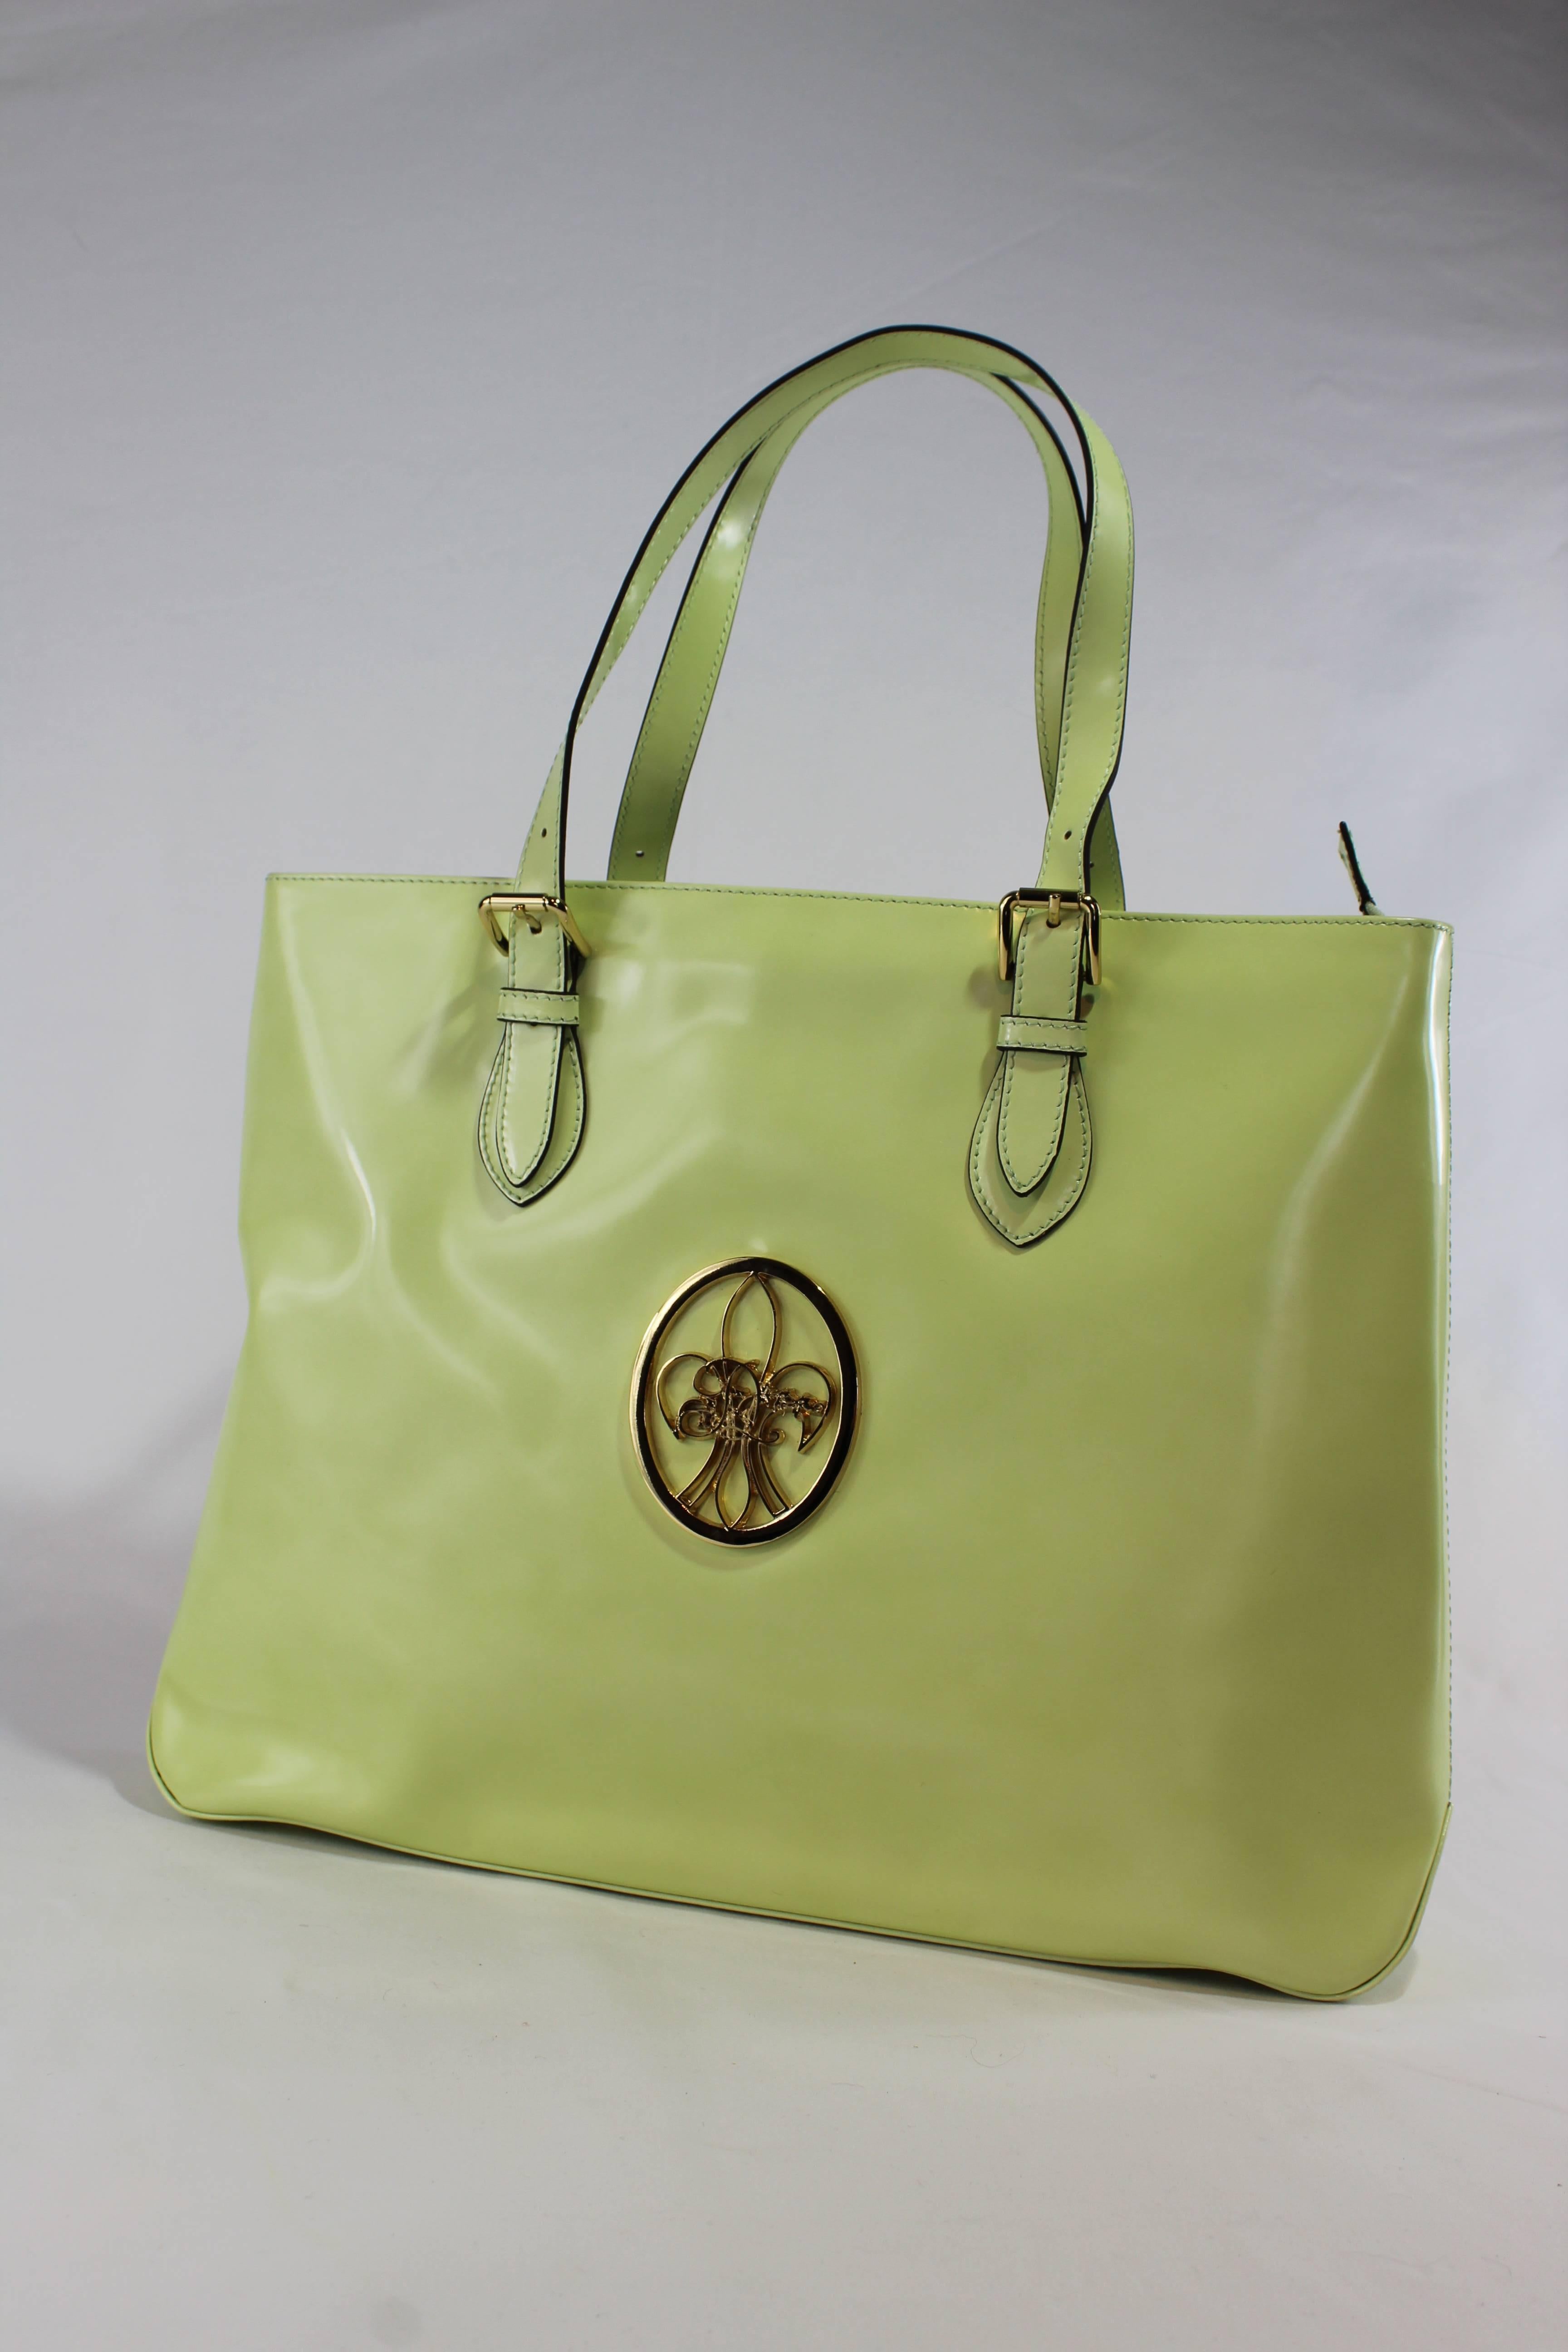 Handbag in varnished leather in eclectic colors, creme linen lining, golden brass features with fleur de lys logo. 
Made in Italy.